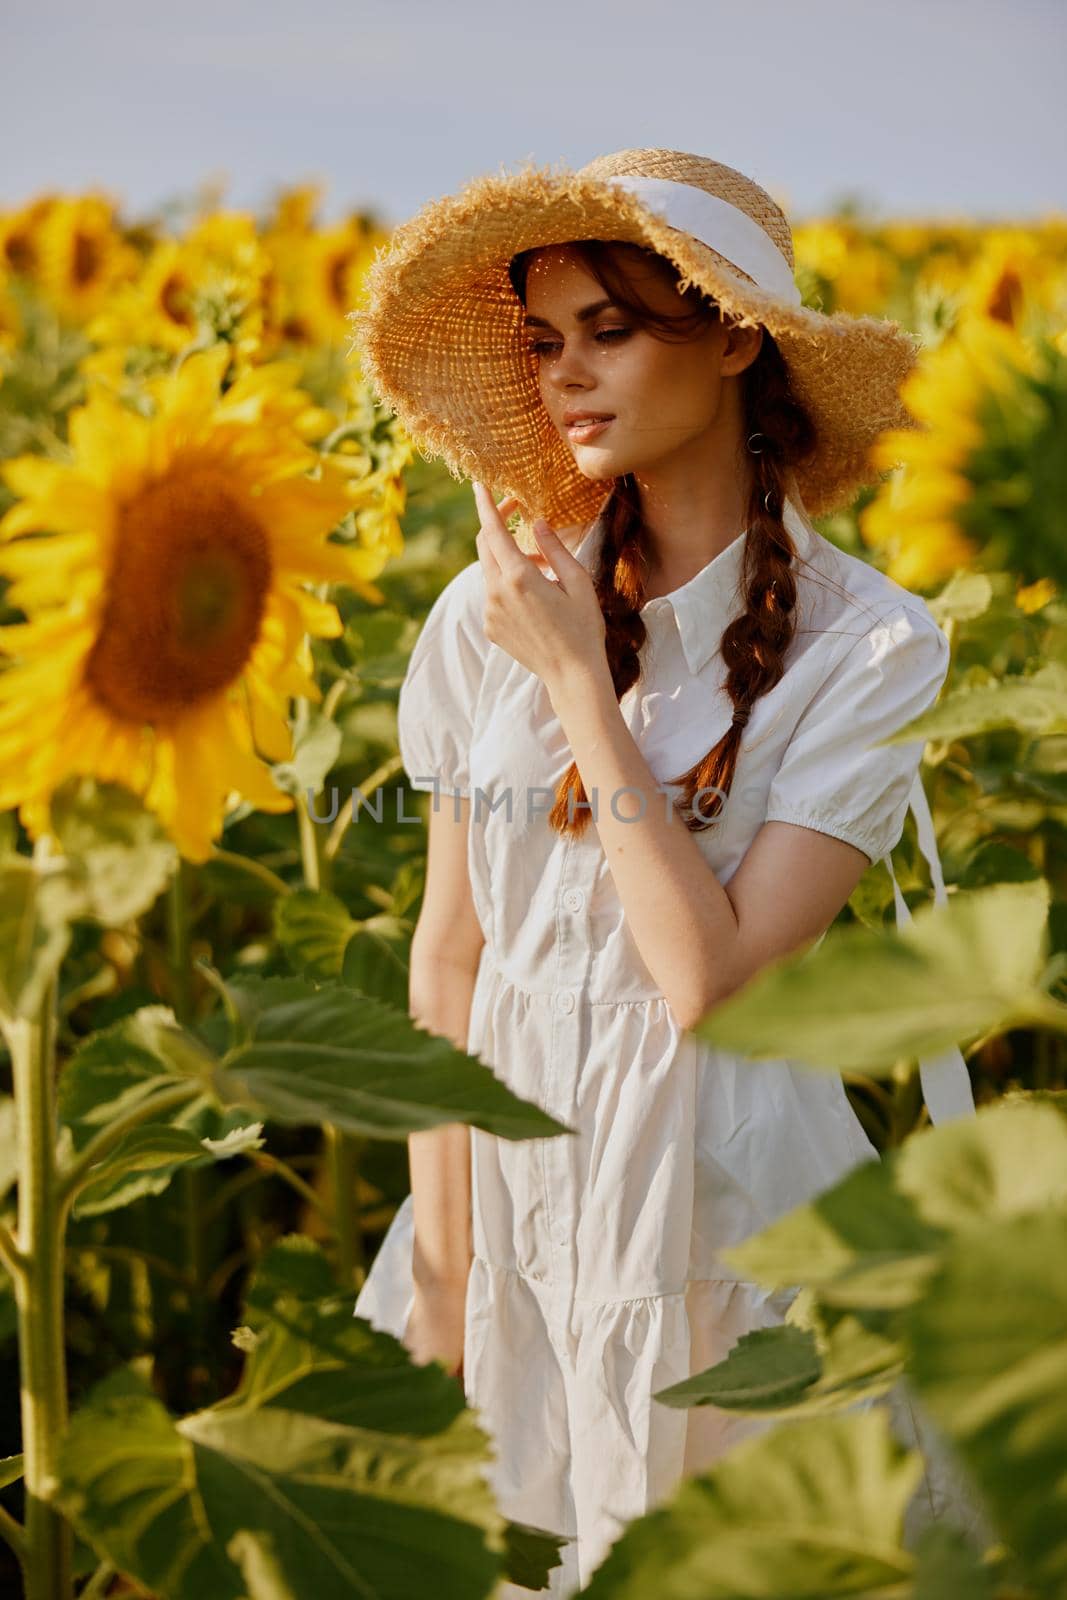 beautiful sweet girl in a white dress walking on a field of sunflowers unaltered. High quality photo